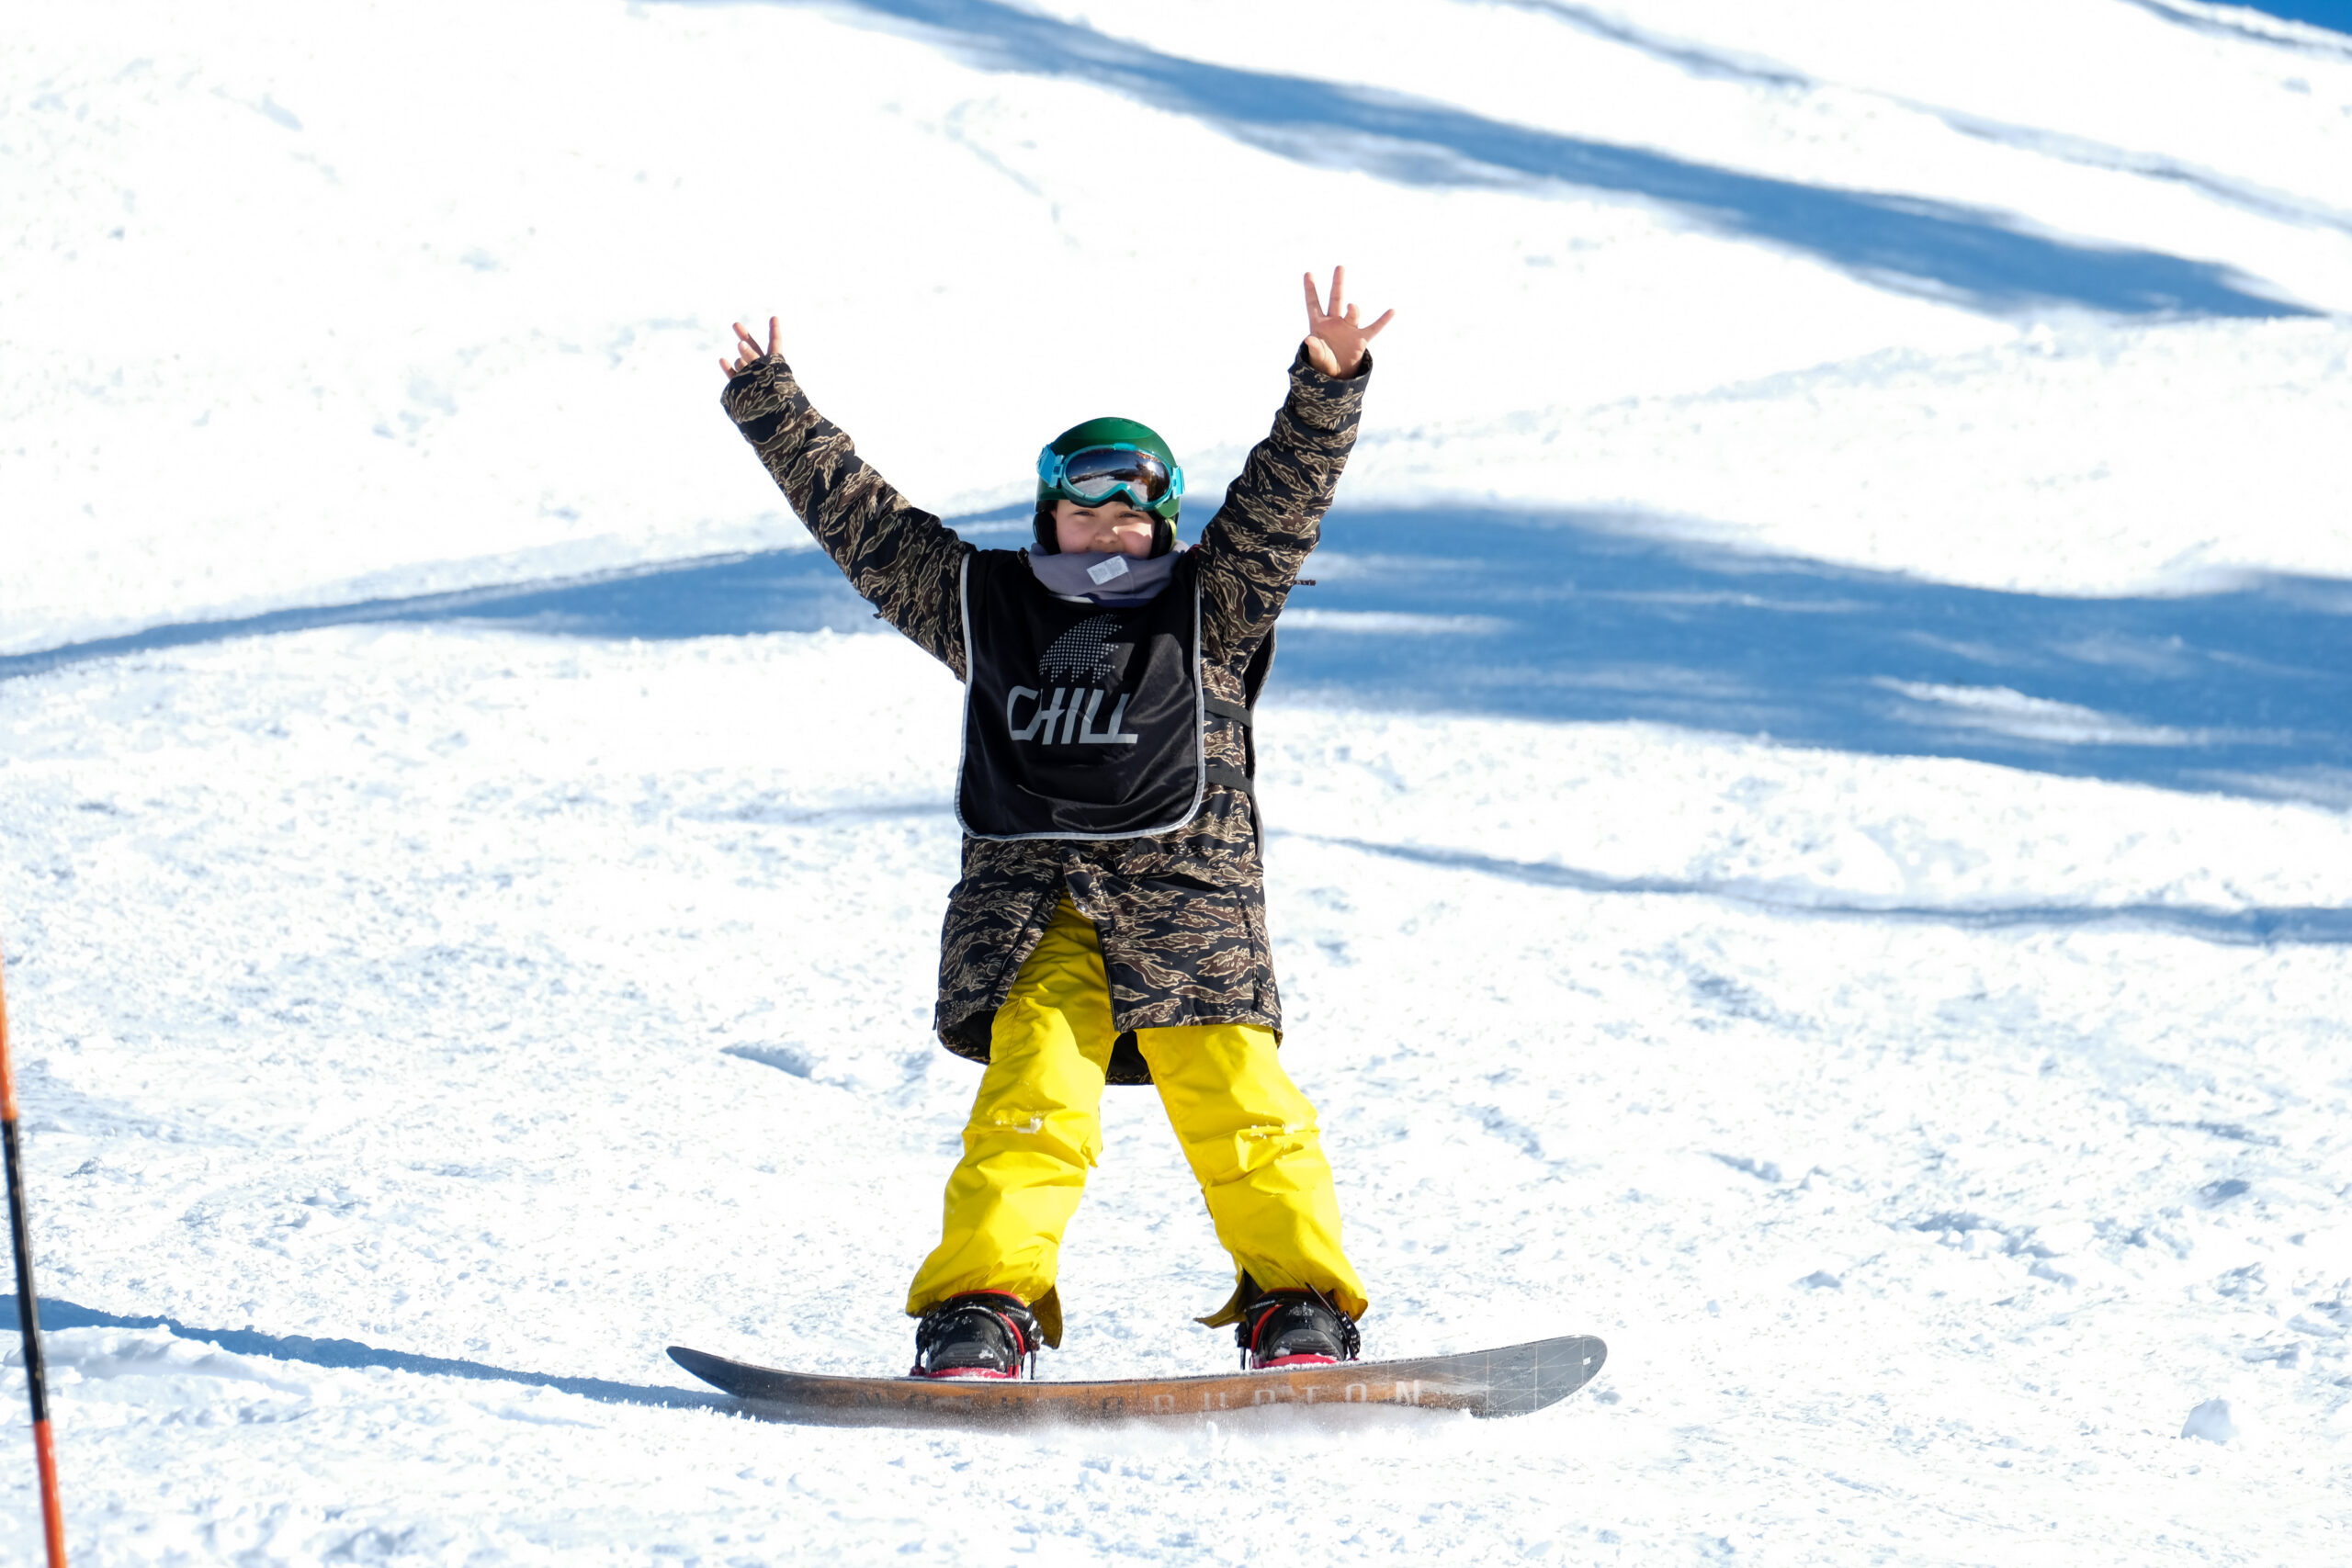 Chill youth snowboarding with their arms in the air in excitement.